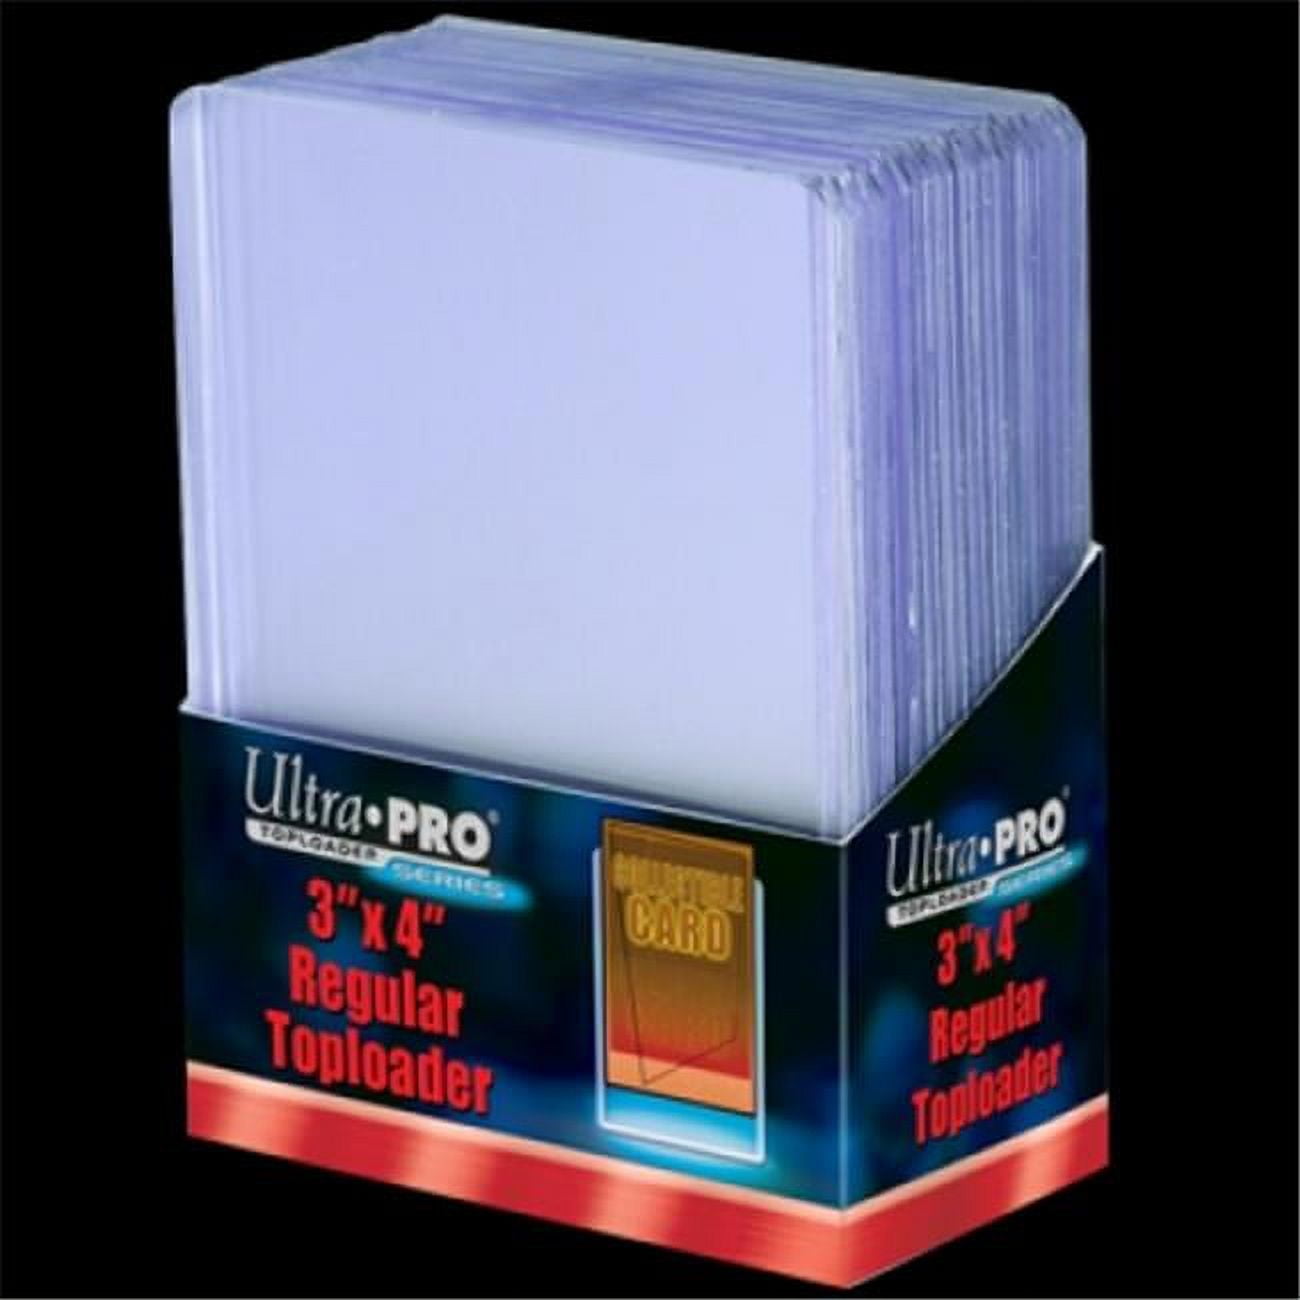 Ultra Pro Premium Toploaders Heavy Duty 3 x 4 Trading Card (25 Count Pack)